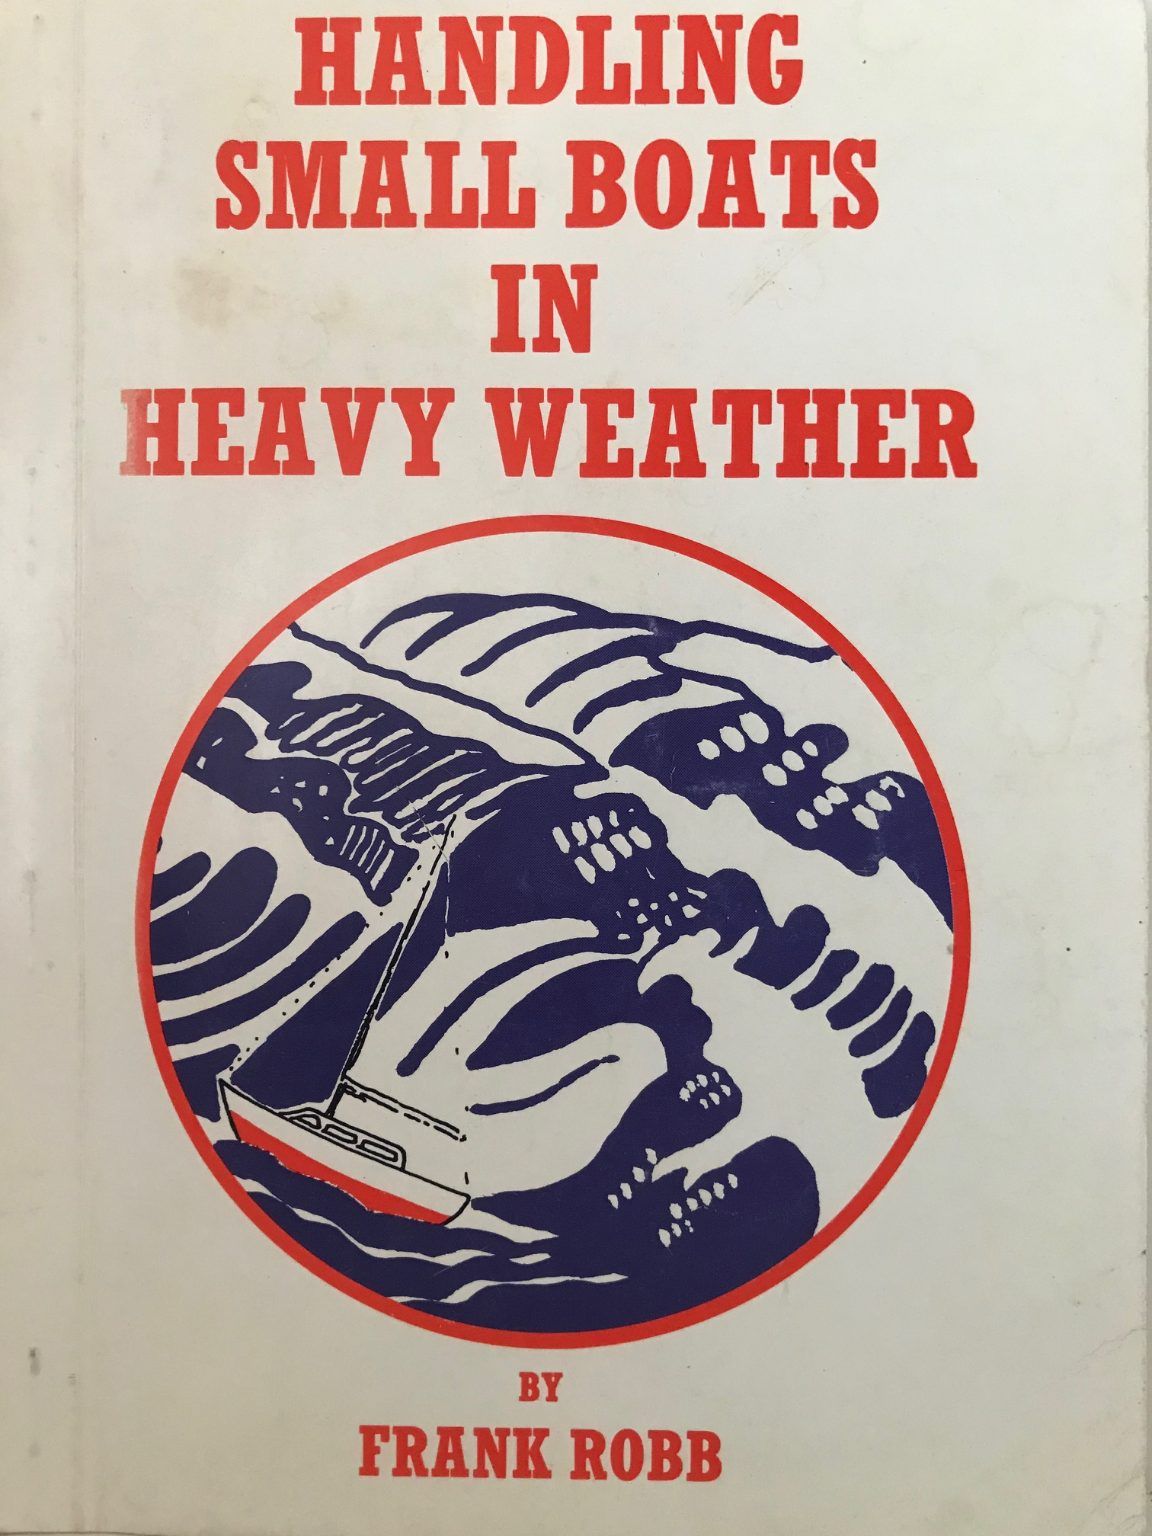 HANDLING SMALL BOATS IN HEAVY WEATHER